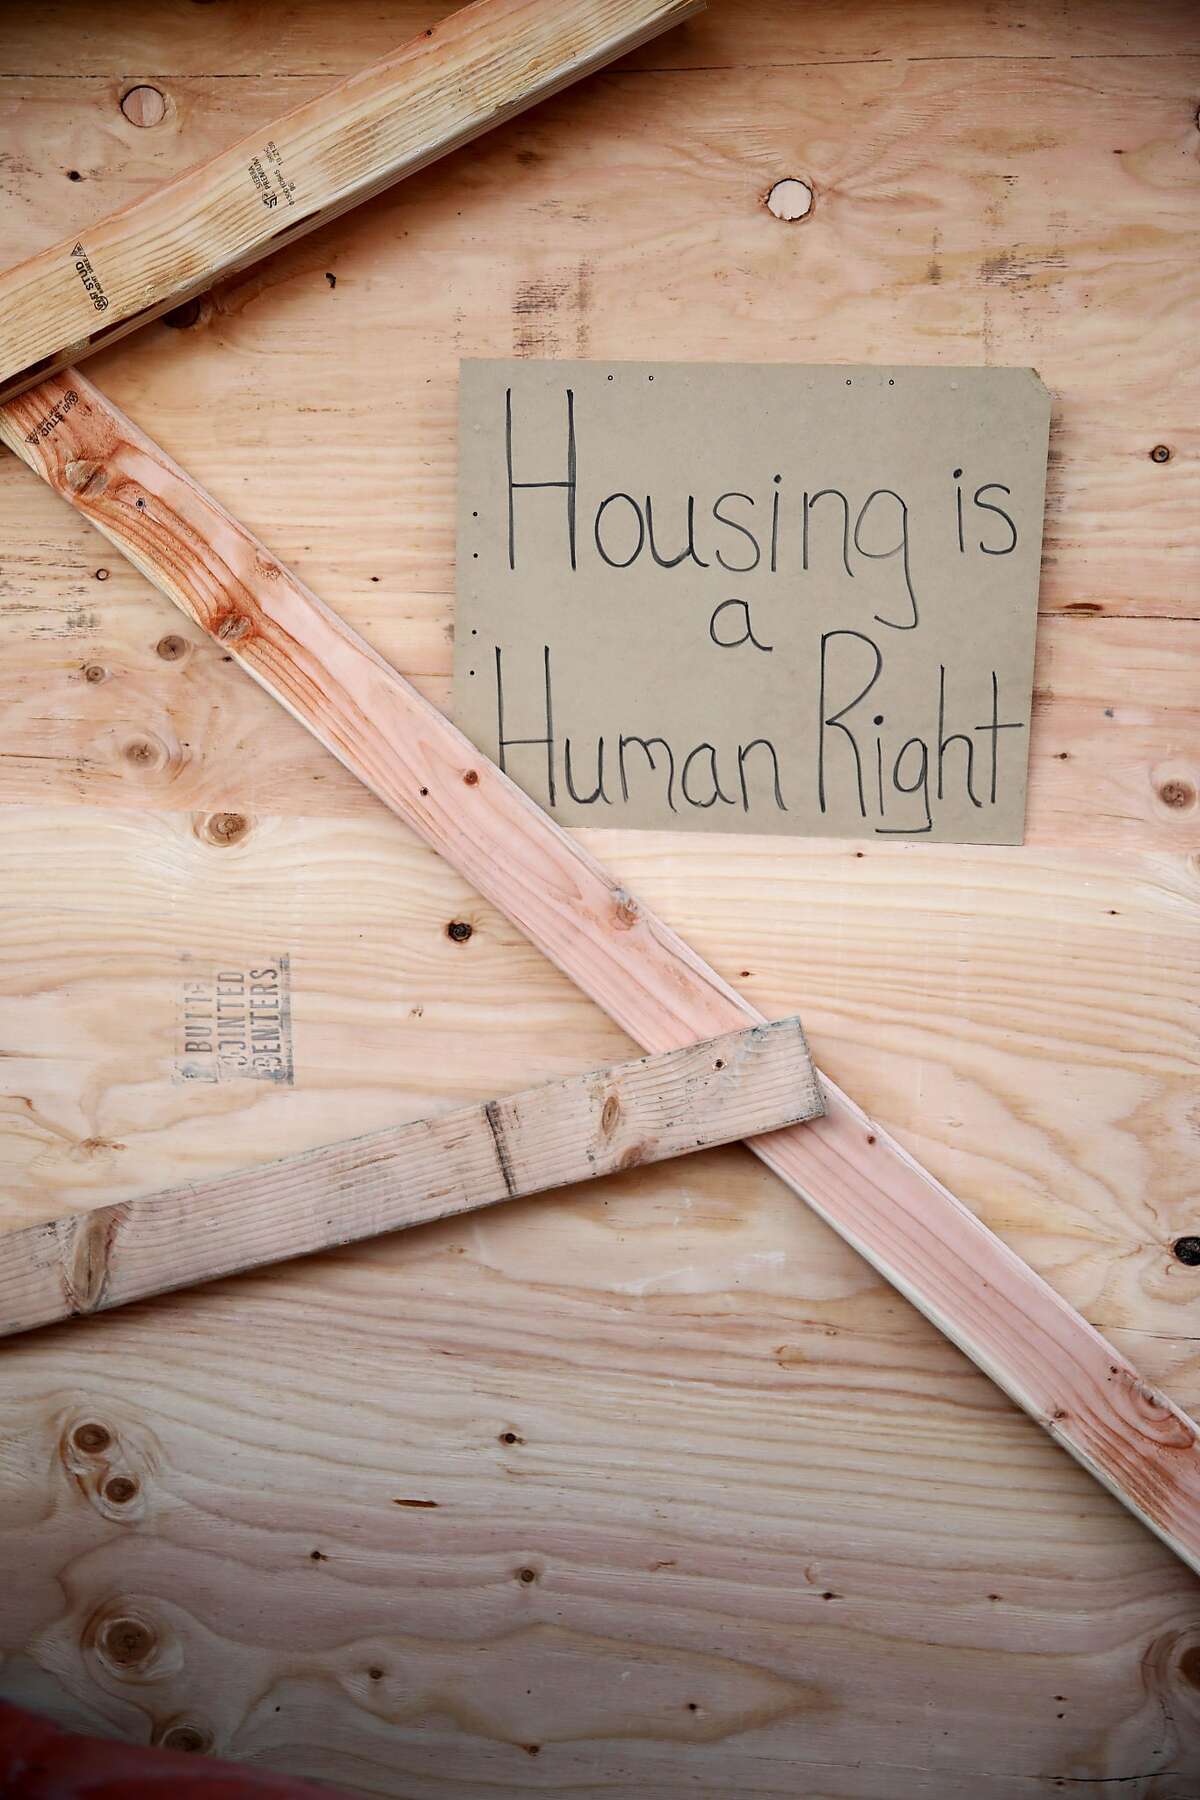 A homemade sign reading, "Housing is a human right," was placed on the boarded garage door following an eviction of the Moms 4 Housing group from the Magnolia Street house the homeless mothers had been occupying in Oakland, Calif., on Tuesday, January 14, 2020. Moms 4 Housing members Misty Cross and Tolani King were arrested. A third person, Jesse Turner, was also arrested. A judge on Friday ruled that Moms 4 Housing didn't have a legal right to the property and that they would be evicted by the Sheriff's Office within days.